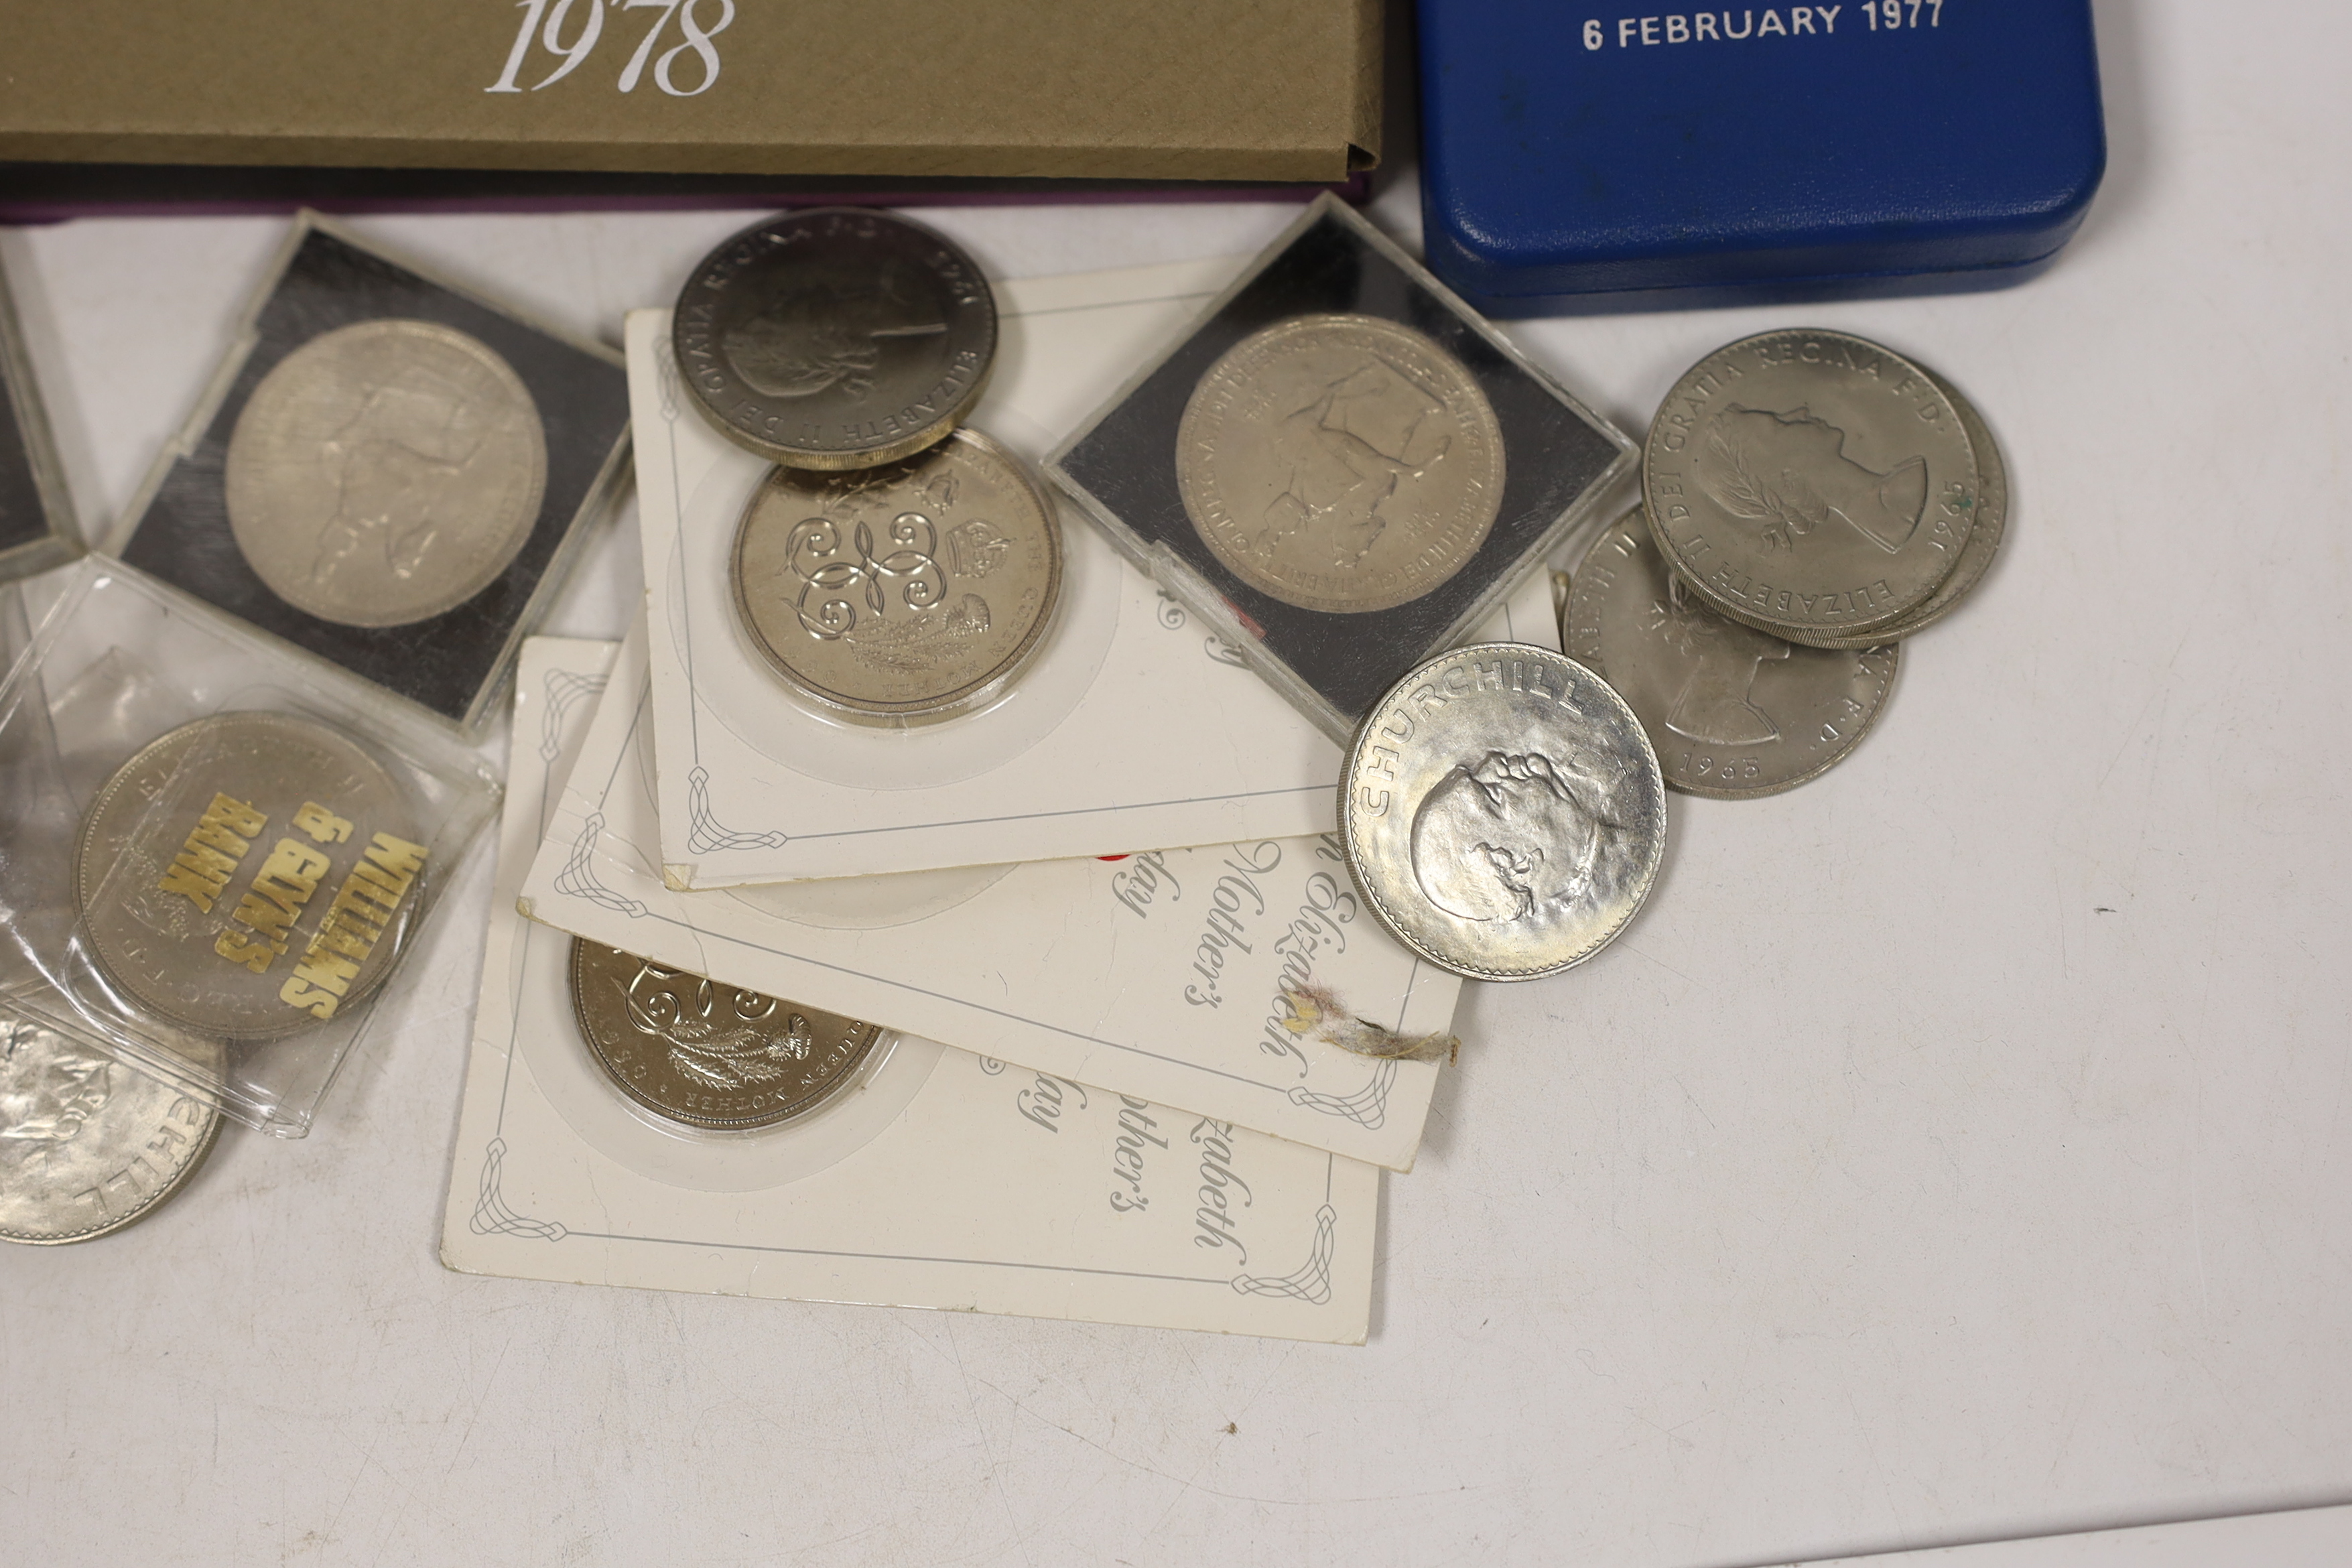 British QEII coins to include Royal Mint proof silver jubilee crown 1977, proof silver marriage of Prince of Wales and lady Diana coin, a 1983 proof silver £1 coin, a 1983 proof piedfort silver £1 coin, three cased year